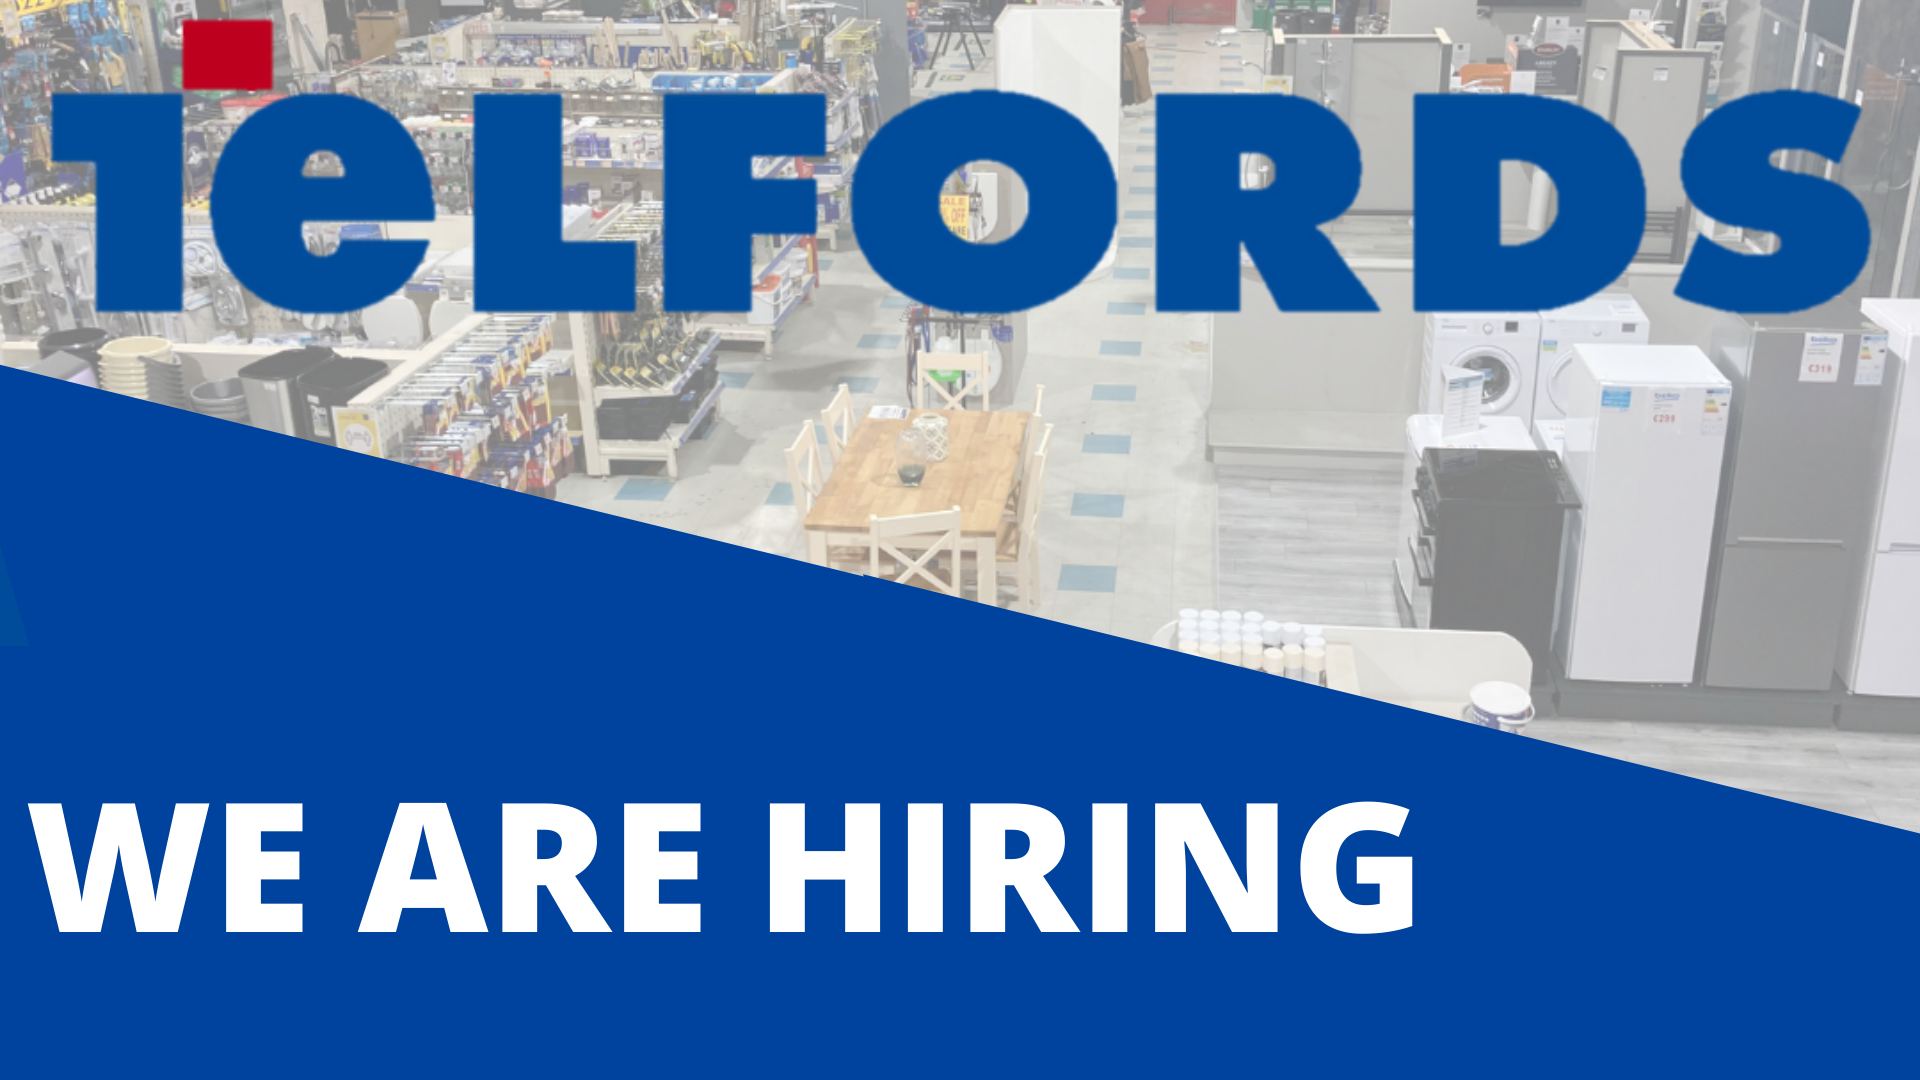 Telfords are currently seeking to hire a trade sales advisor for their Portlaoise store